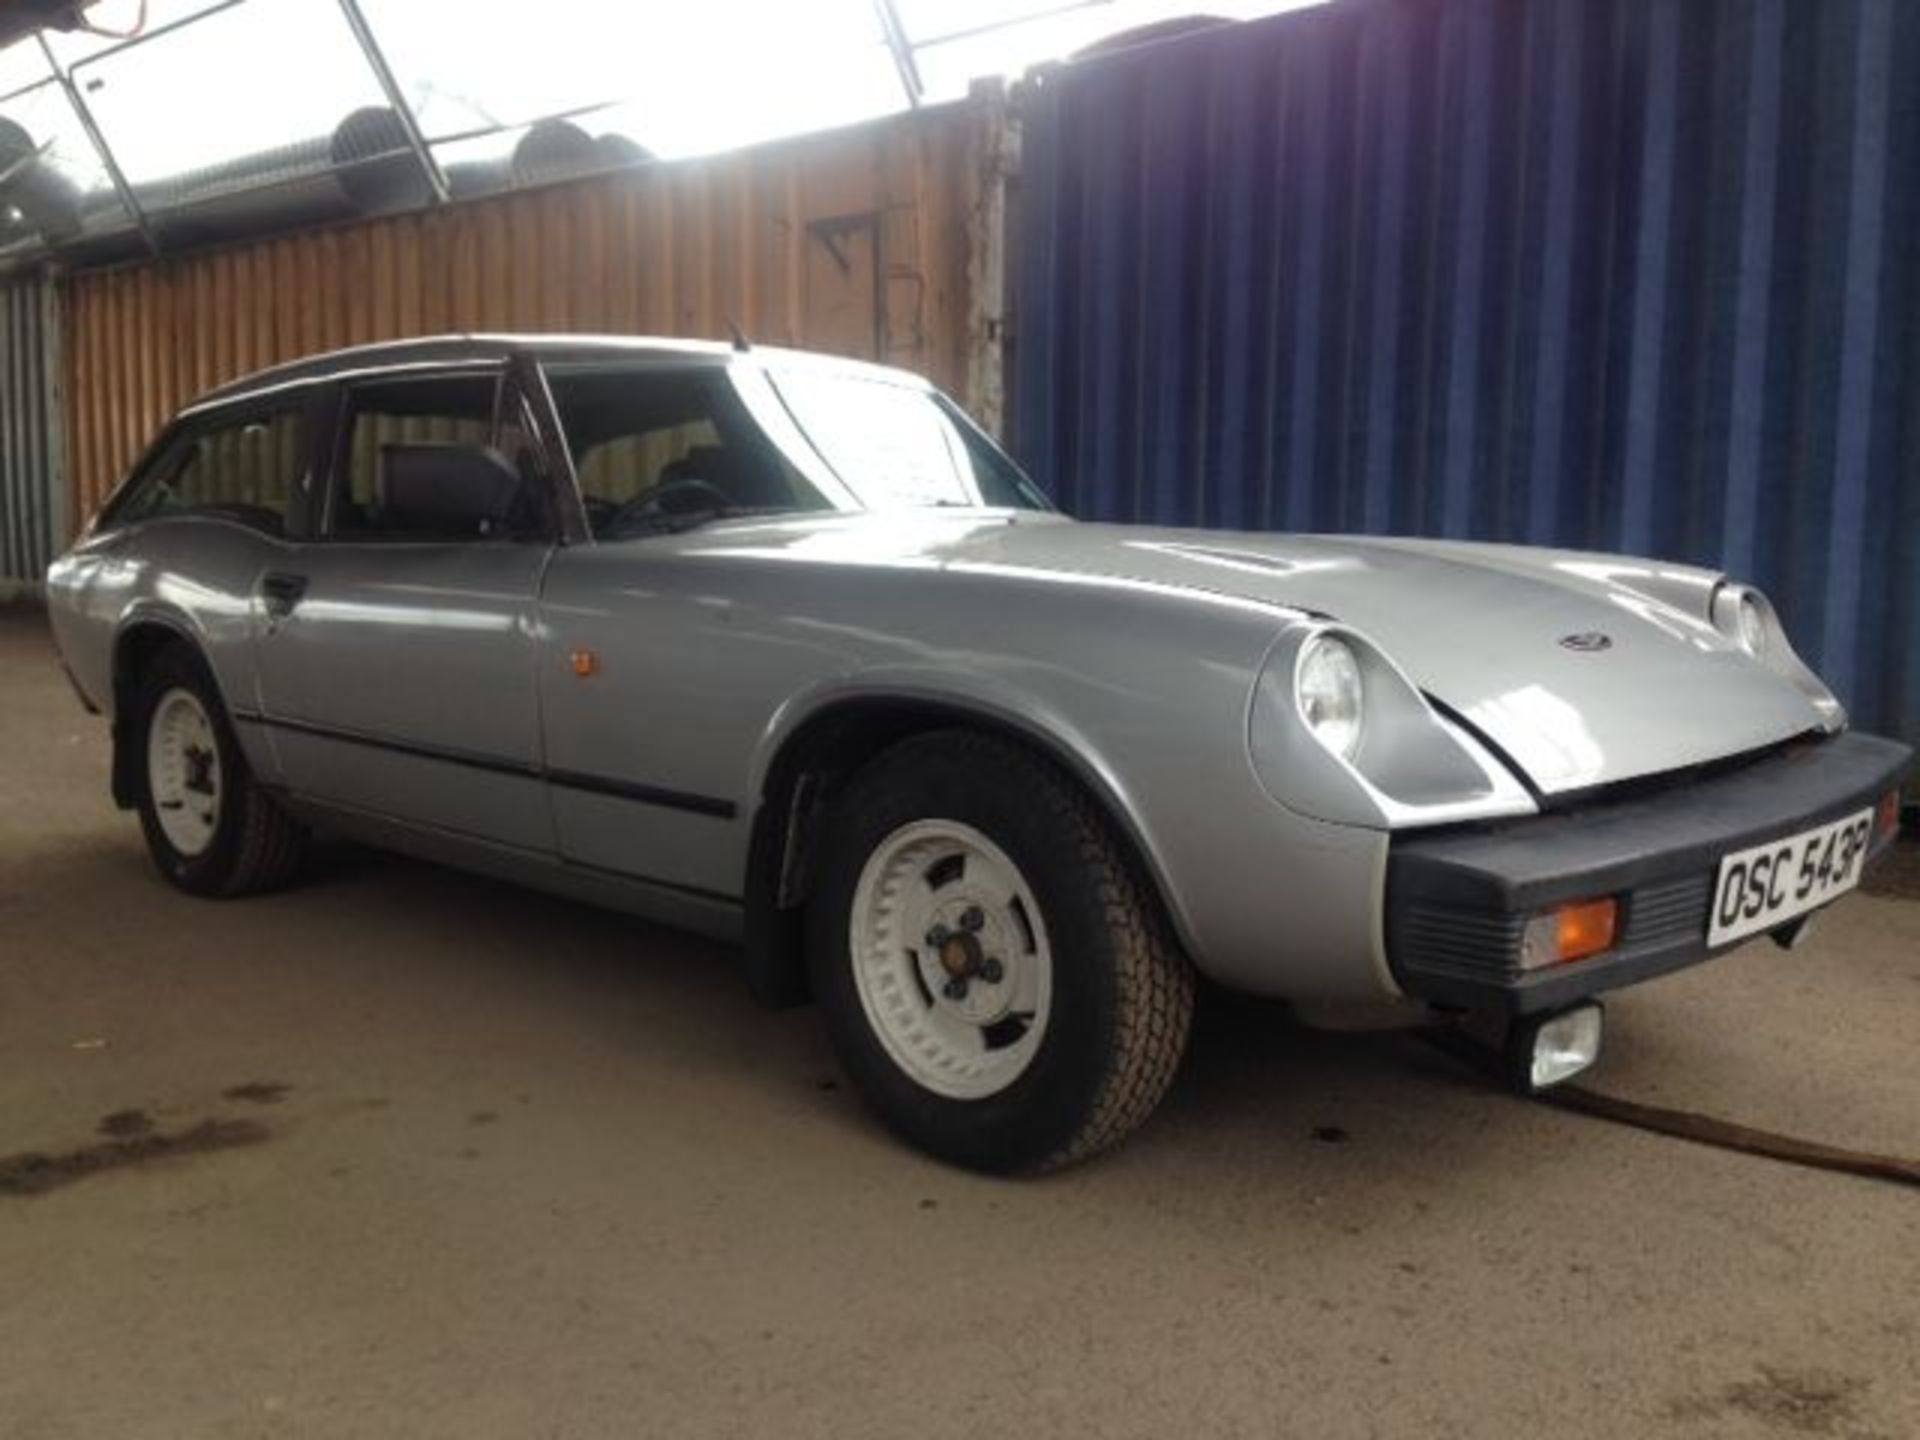 JENSEN, GT - 1973cc, Chassis number 30055 - this very early example was first registered on